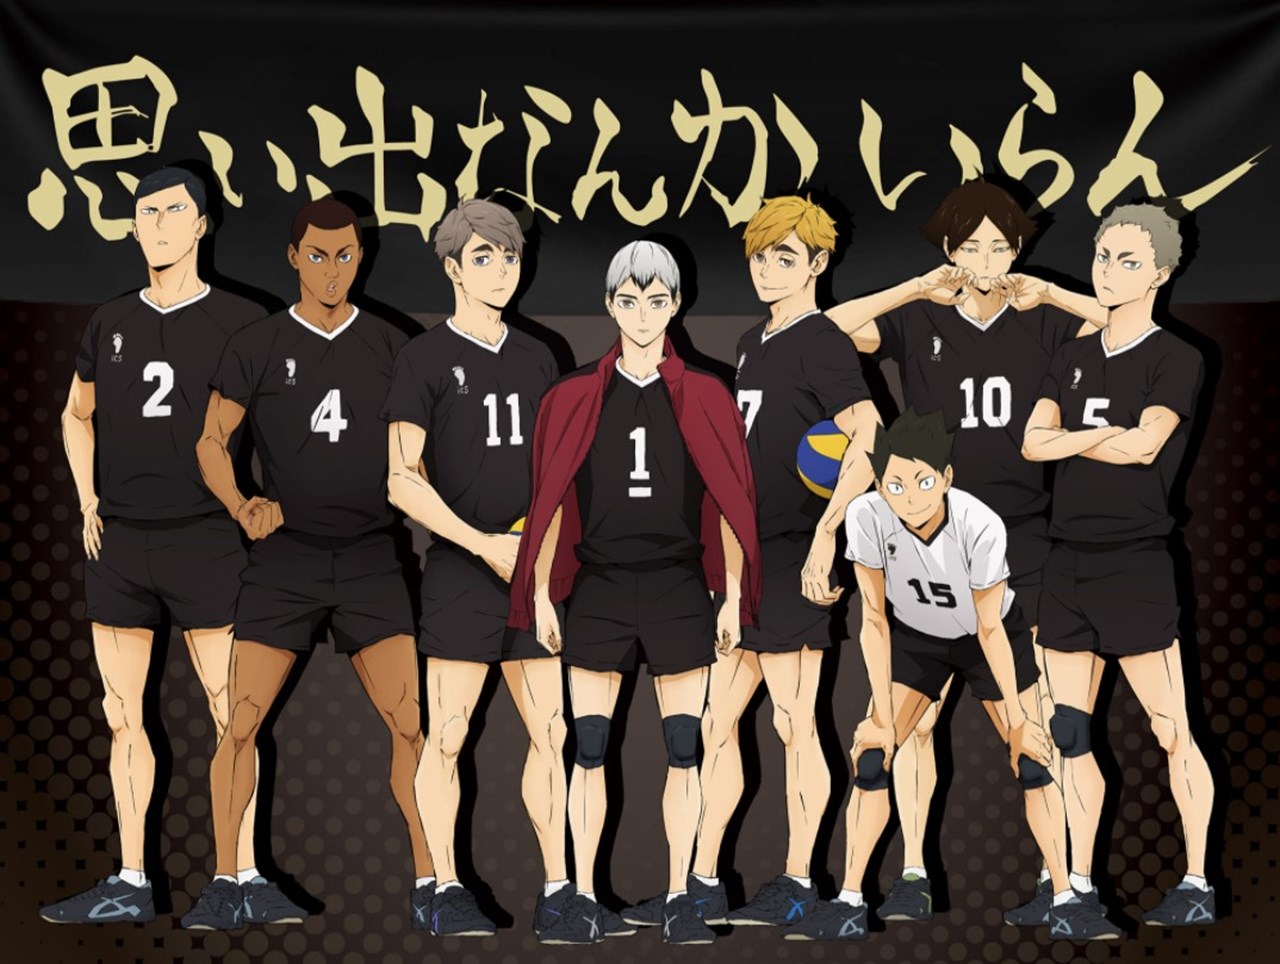 Haikyuu!! Season 5 has possibility to be out in summer 2021